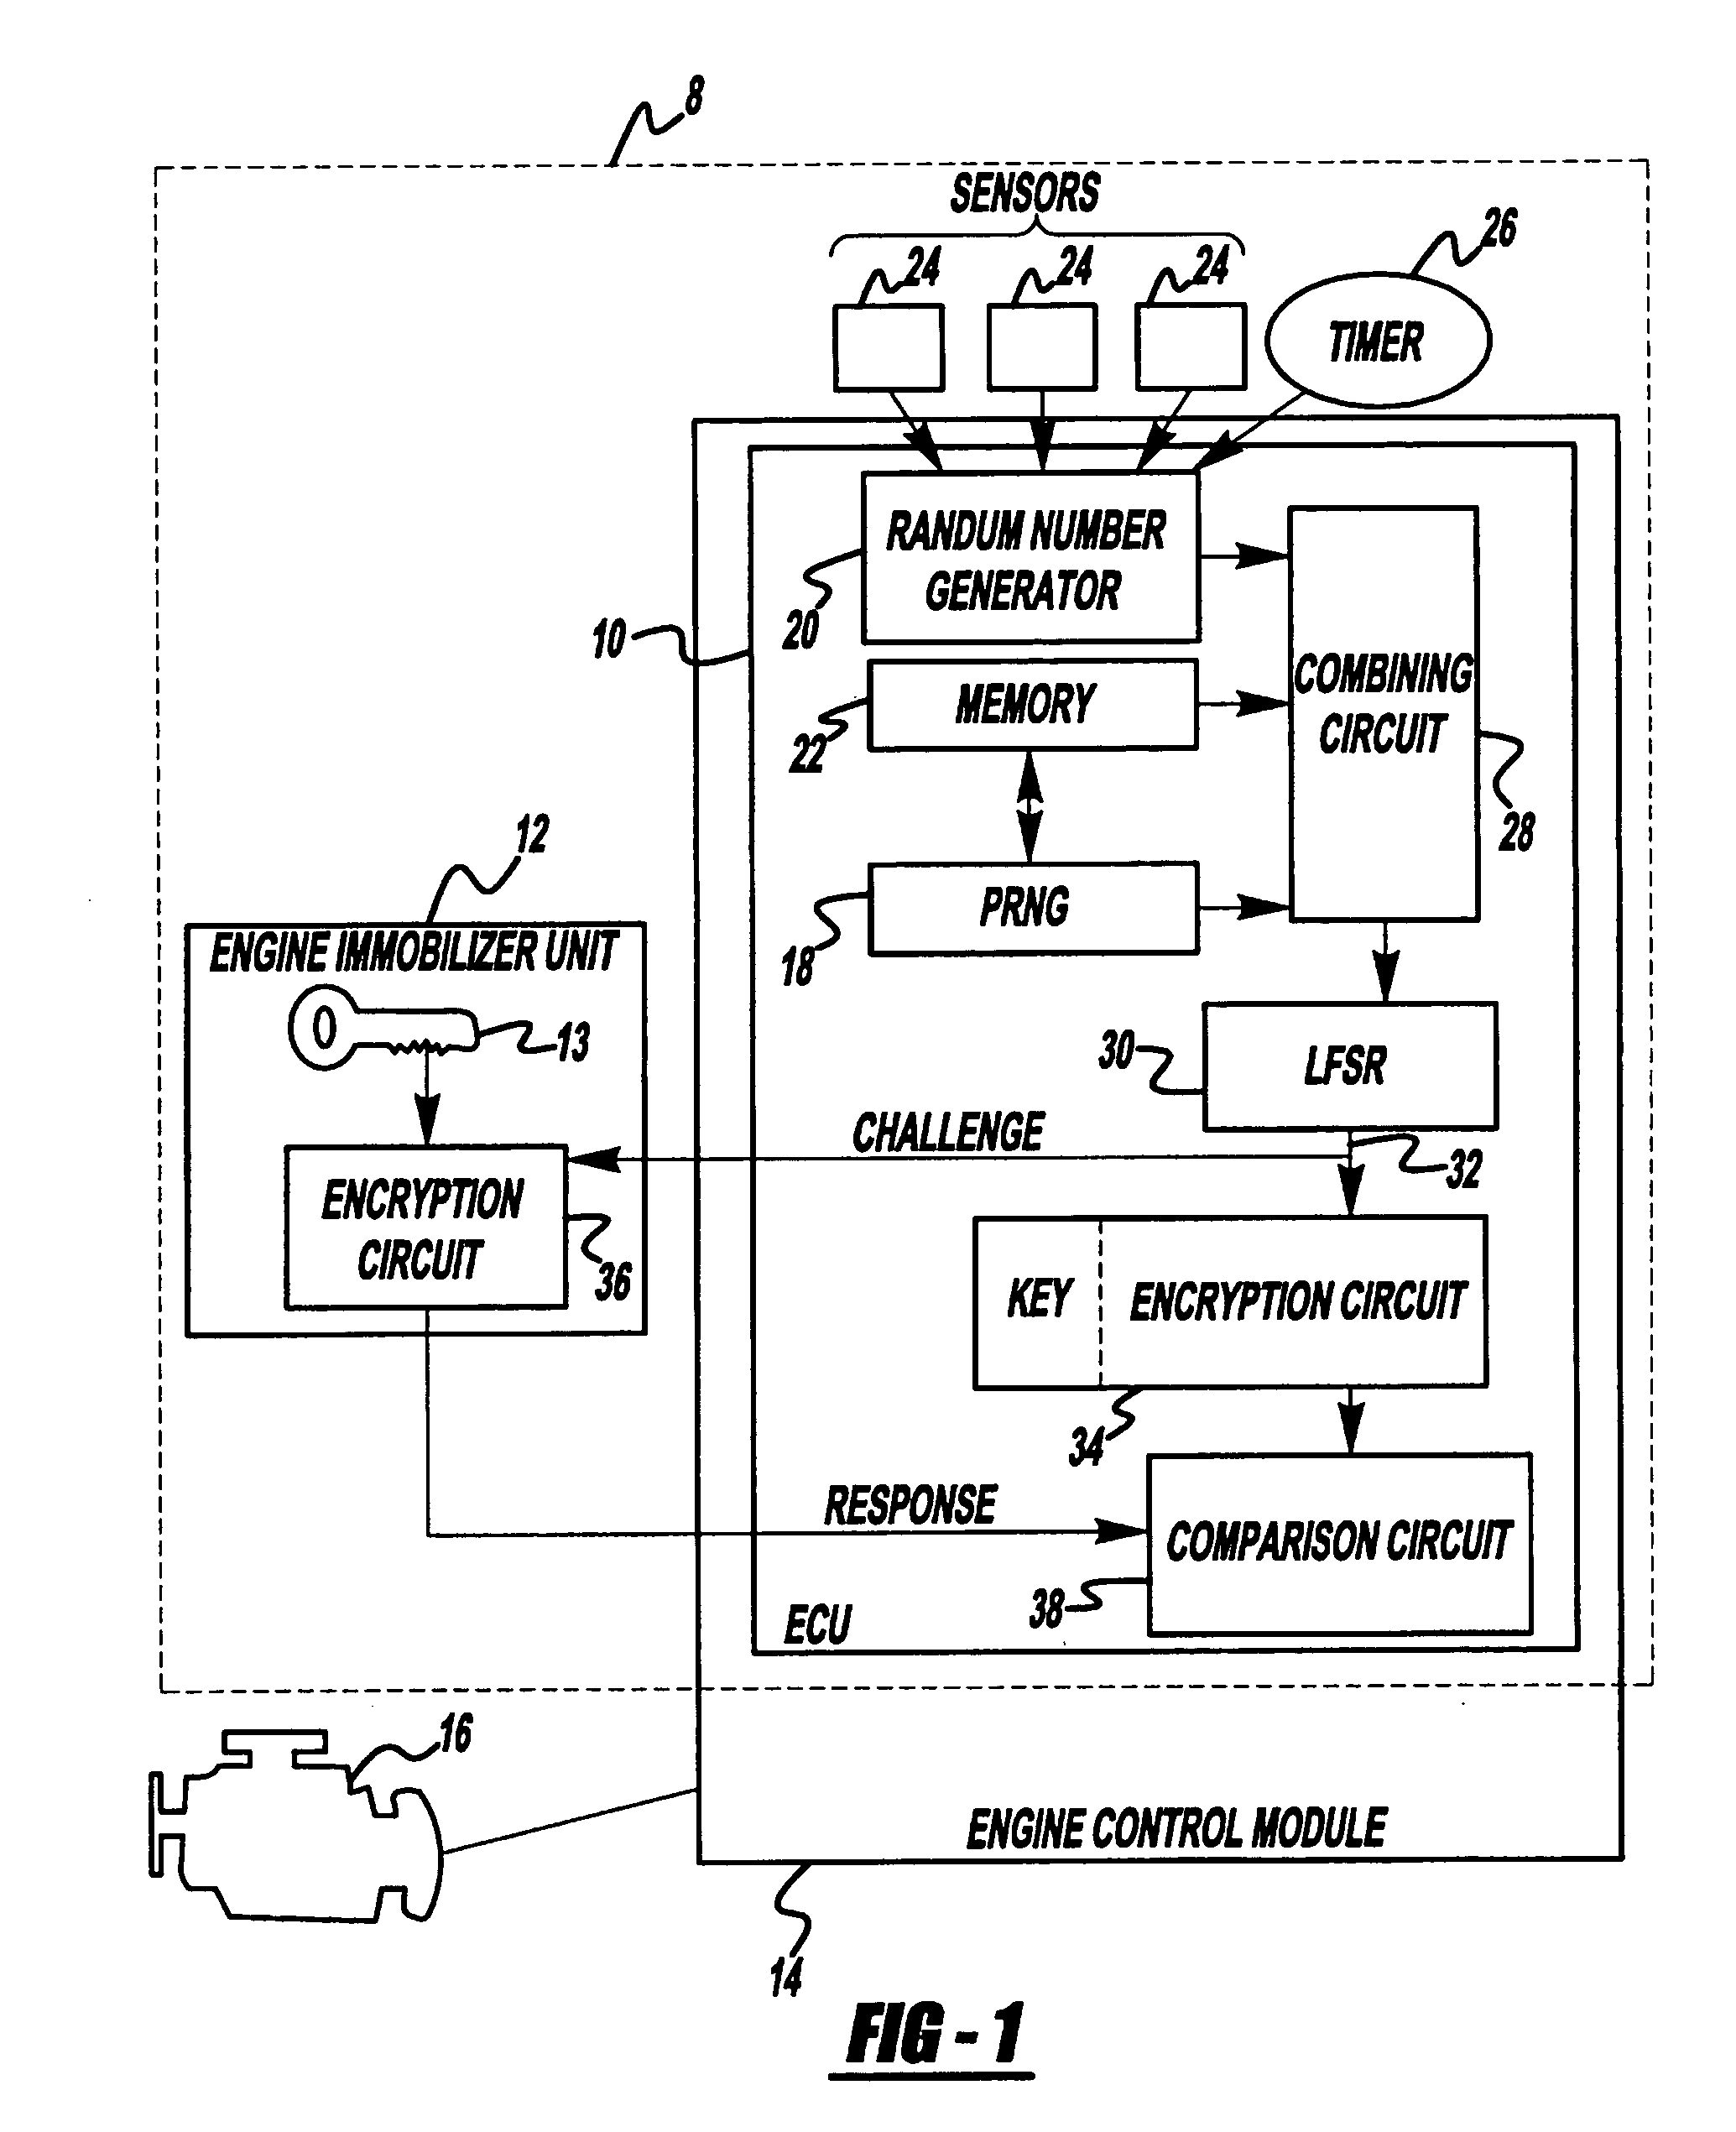 Motor vehicle engine immobilizer security system and method